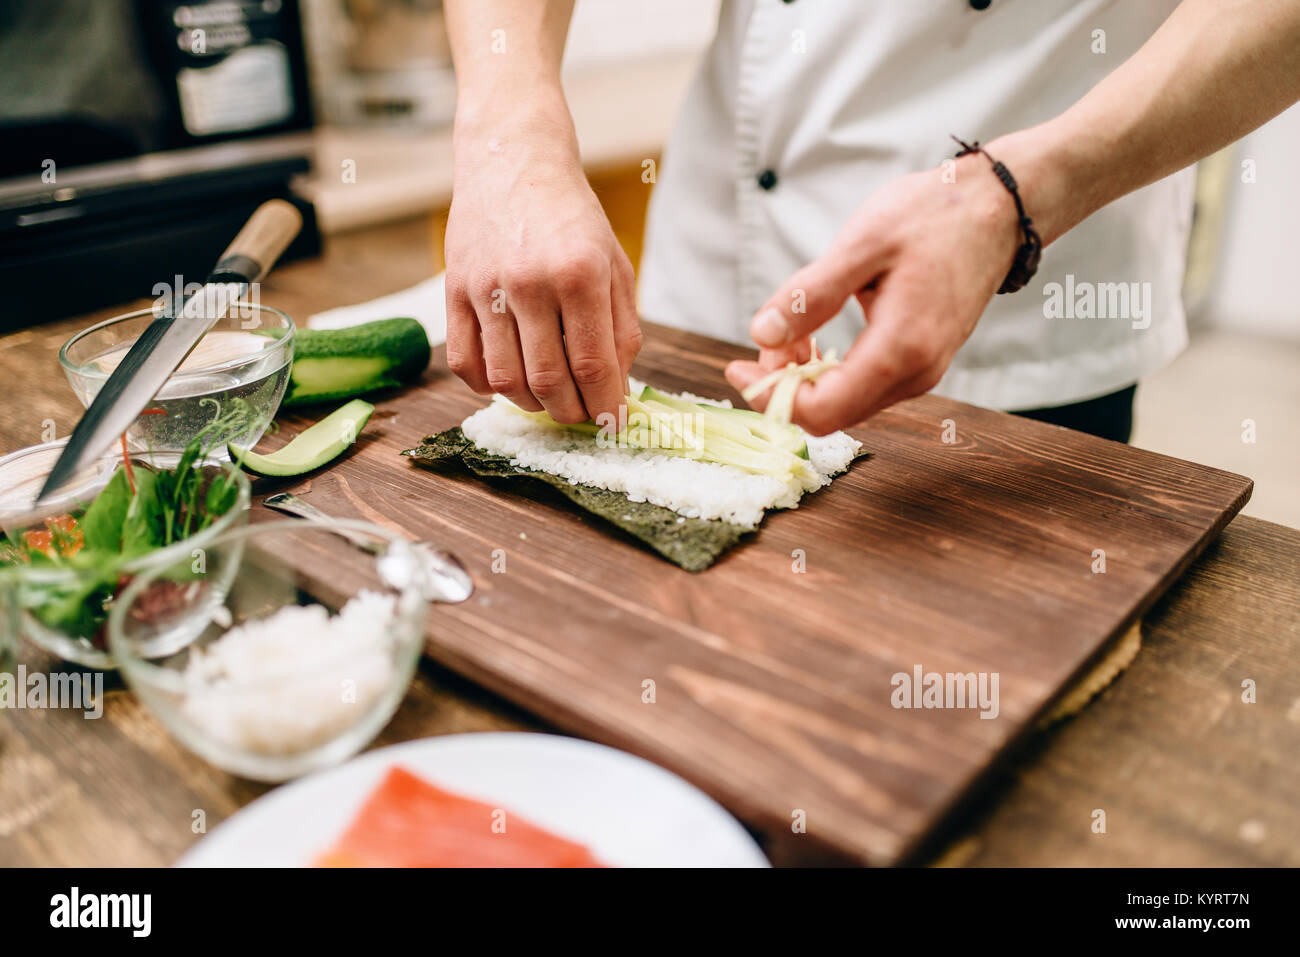 https://c8.alamy.com/comp/KYRT7N/male-cook-hands-making-sushi-rolls-seafood-traditional-japanese-cuisine-KYRT7N.jpg